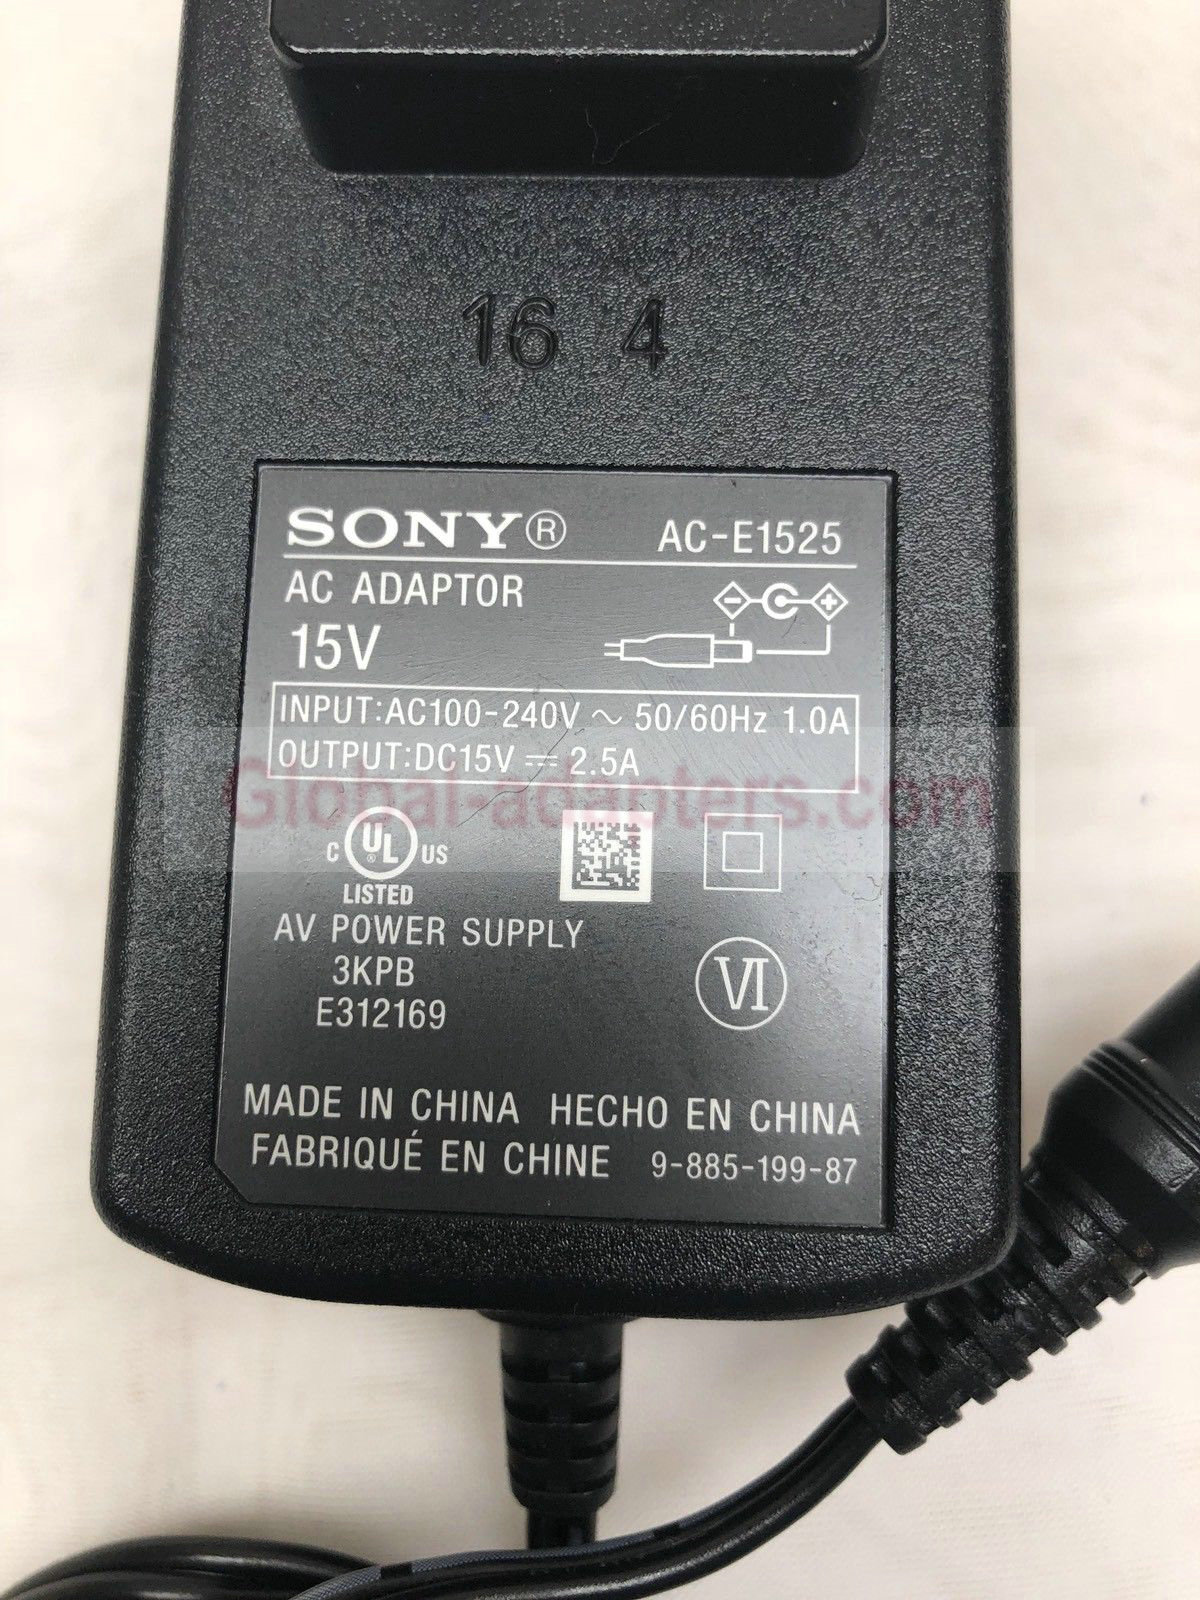 New 15V 2.5A Sony AC-E1525 AC DC Adapter For Sony SRS-XB3, SRS-X55, LF-S50G Power Supply